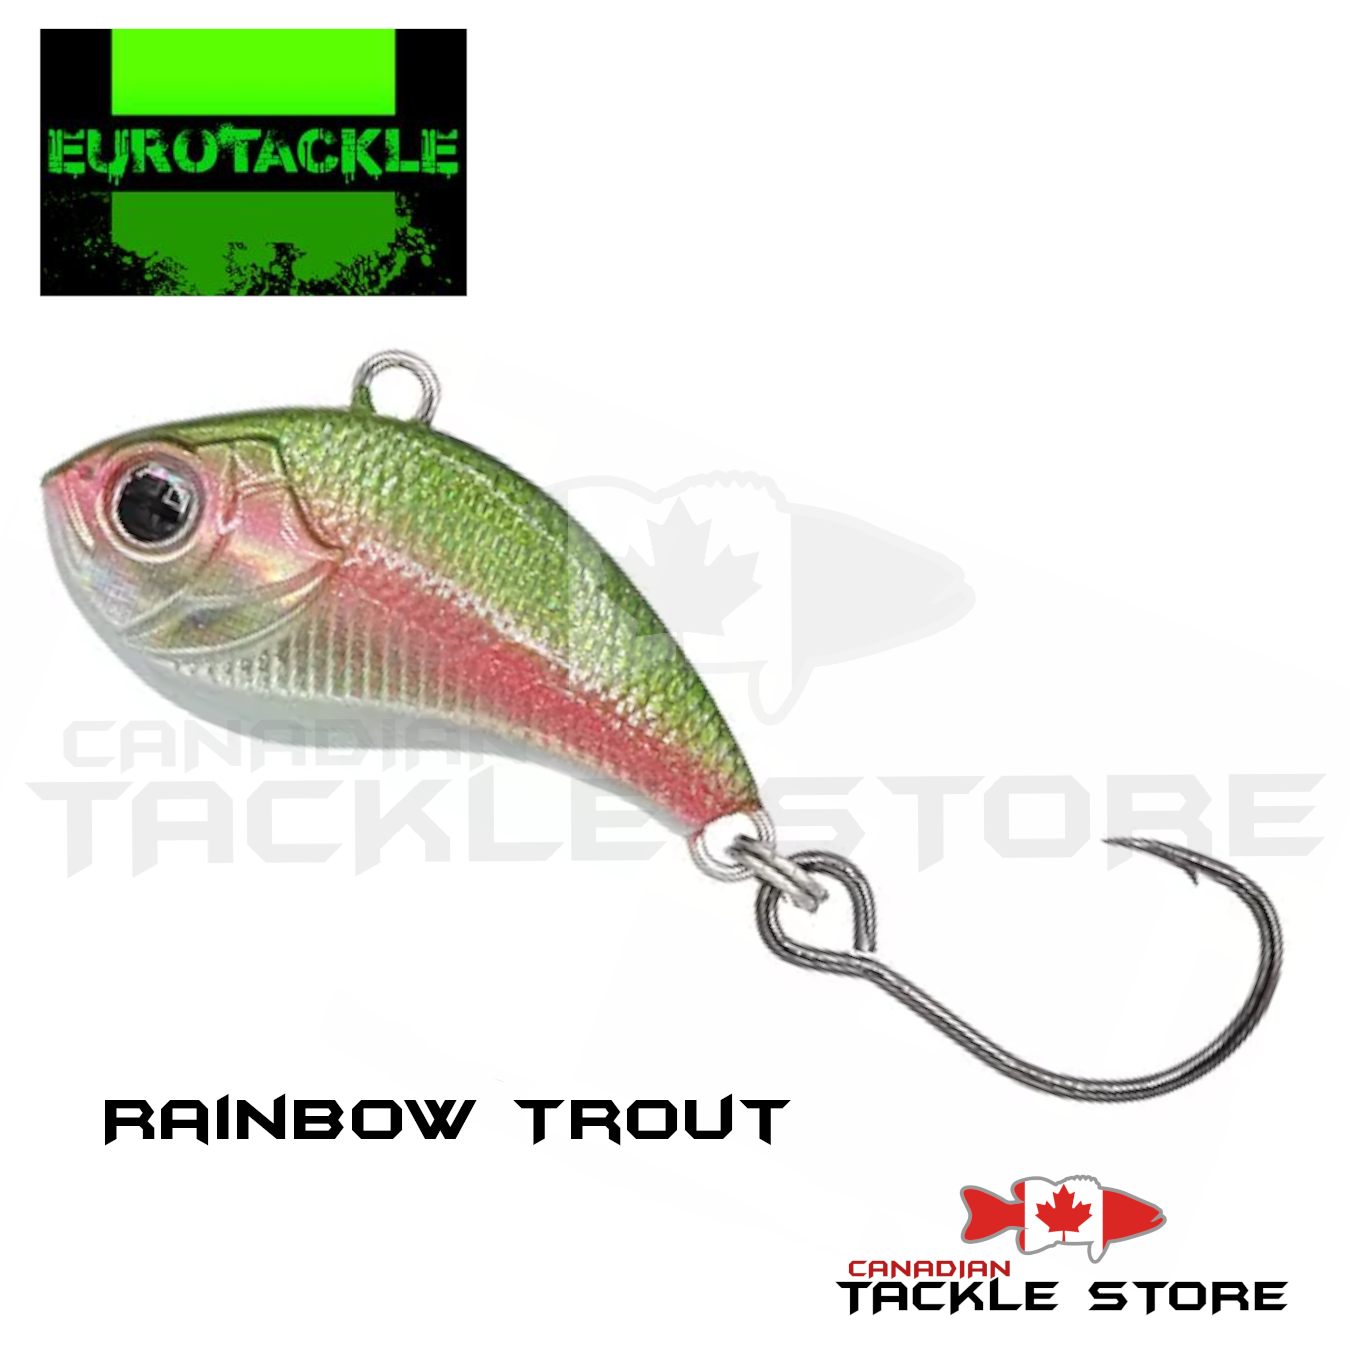 Lipless – Canadian Tackle Store